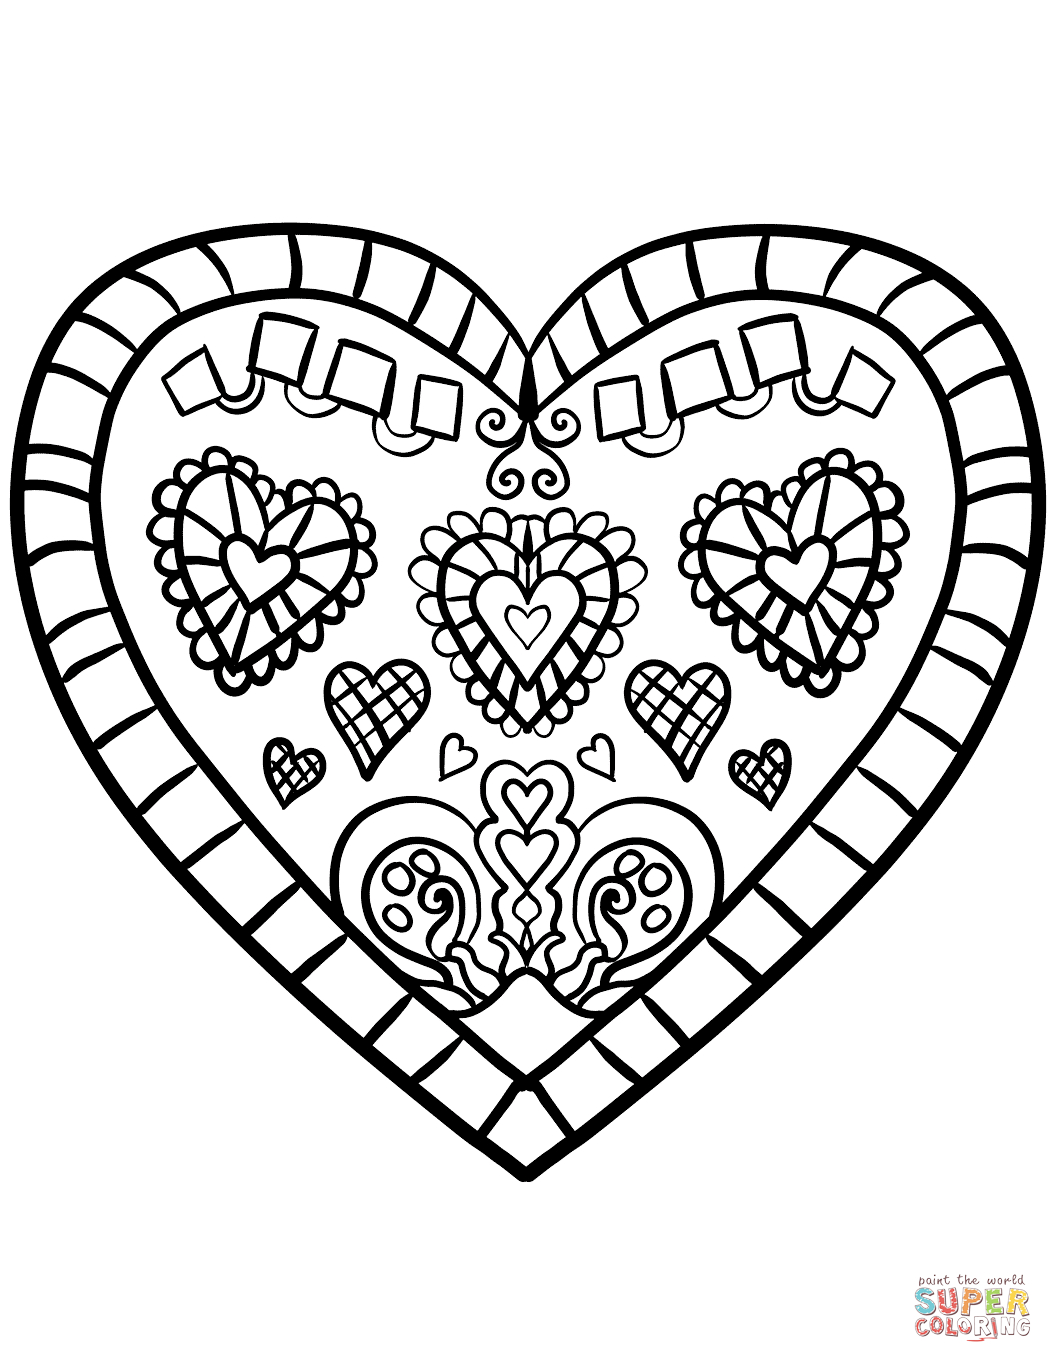 Decorated Heart Coloring Page | Free Printable Coloring Pages - Free Printable Heart Coloring Pages